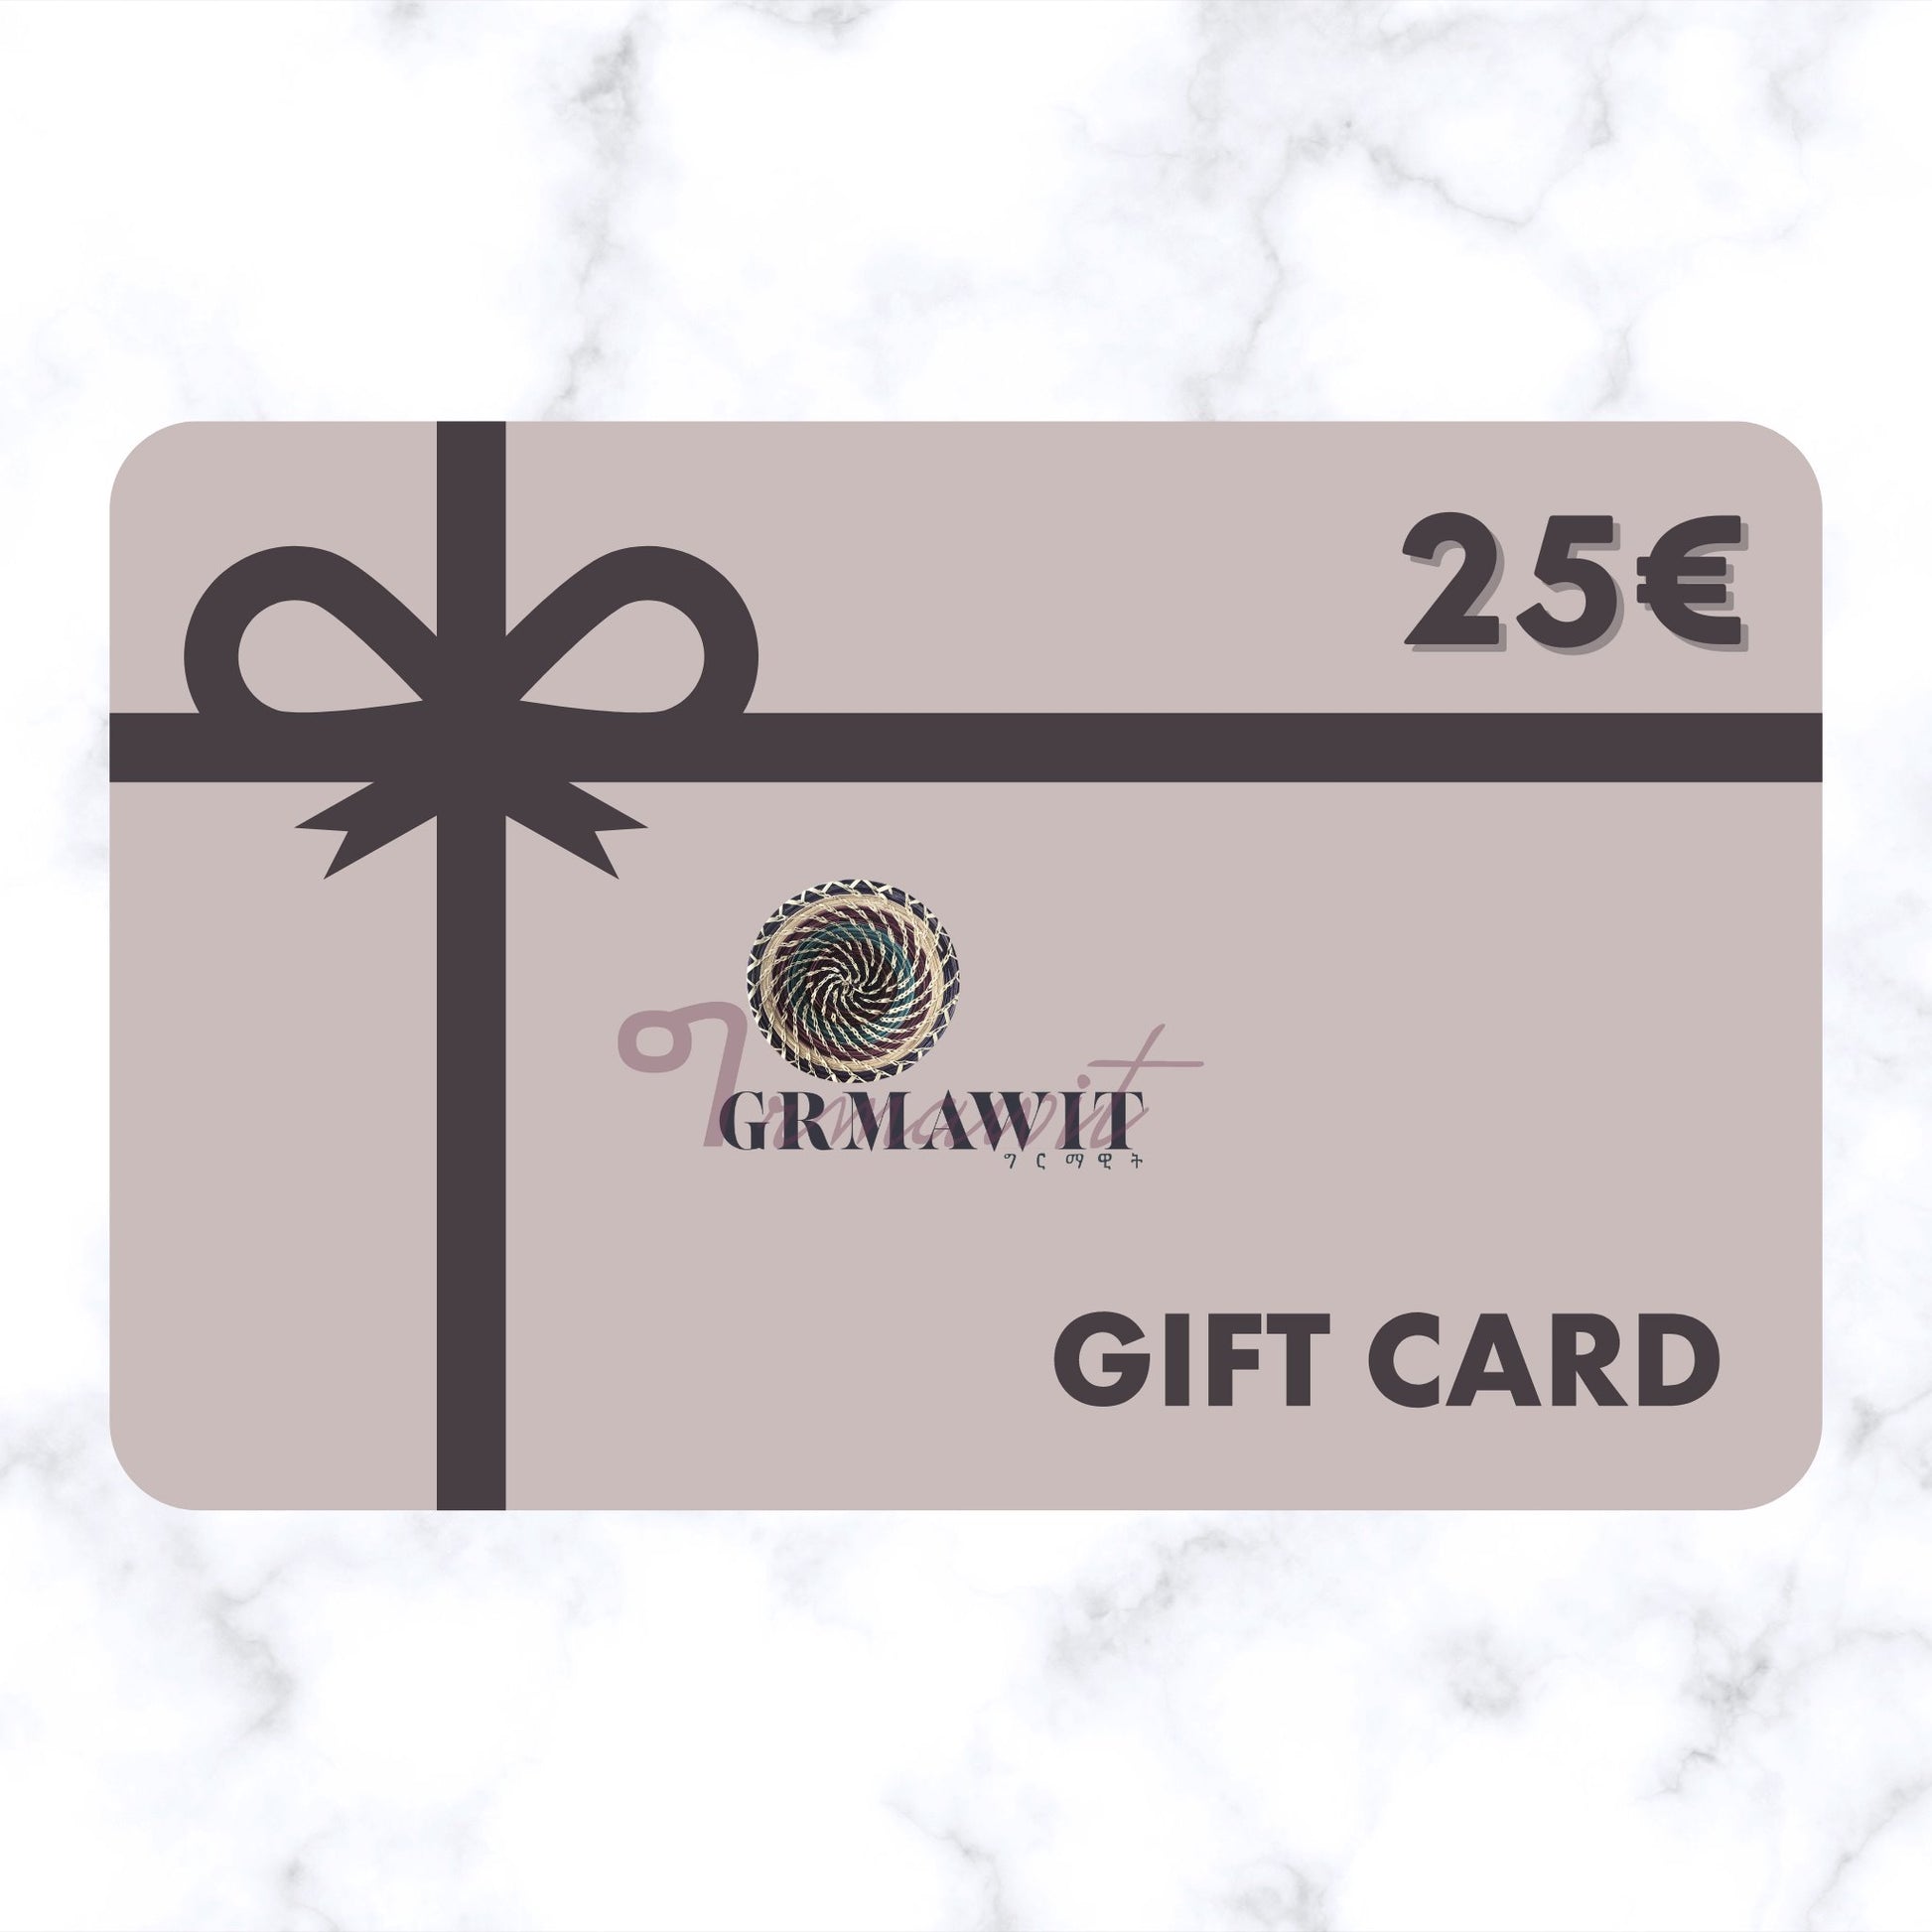 GIFT CARD Gift Cards Grmawit 25,00 € 